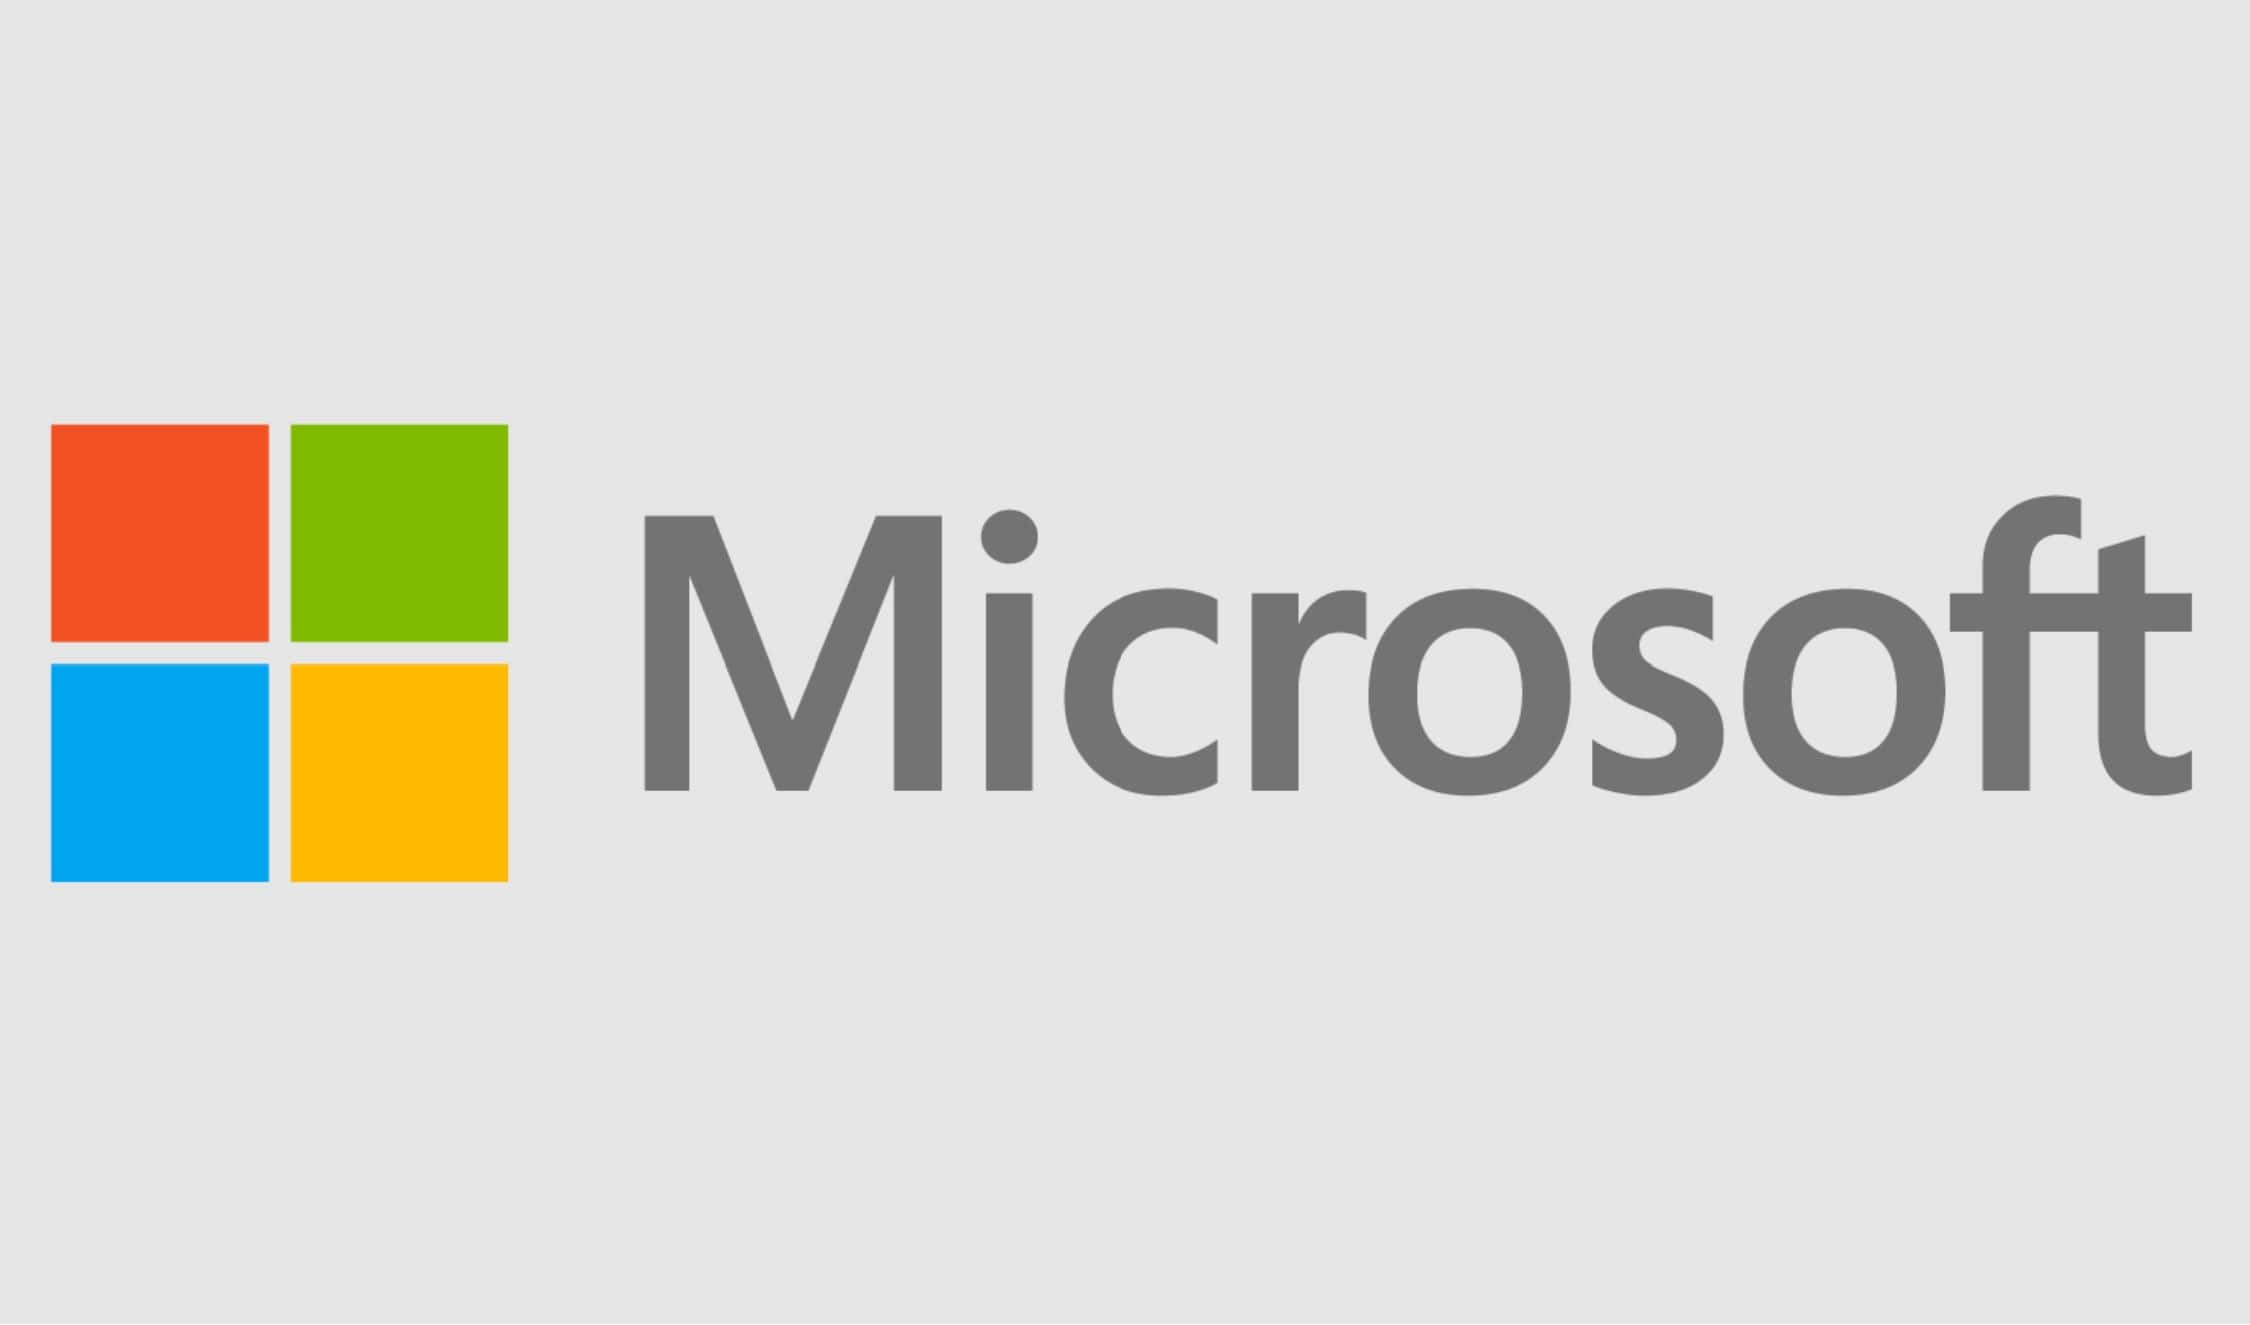 Microsoft to invest $3.16 billion in Australia to increase its cloud computing capacity